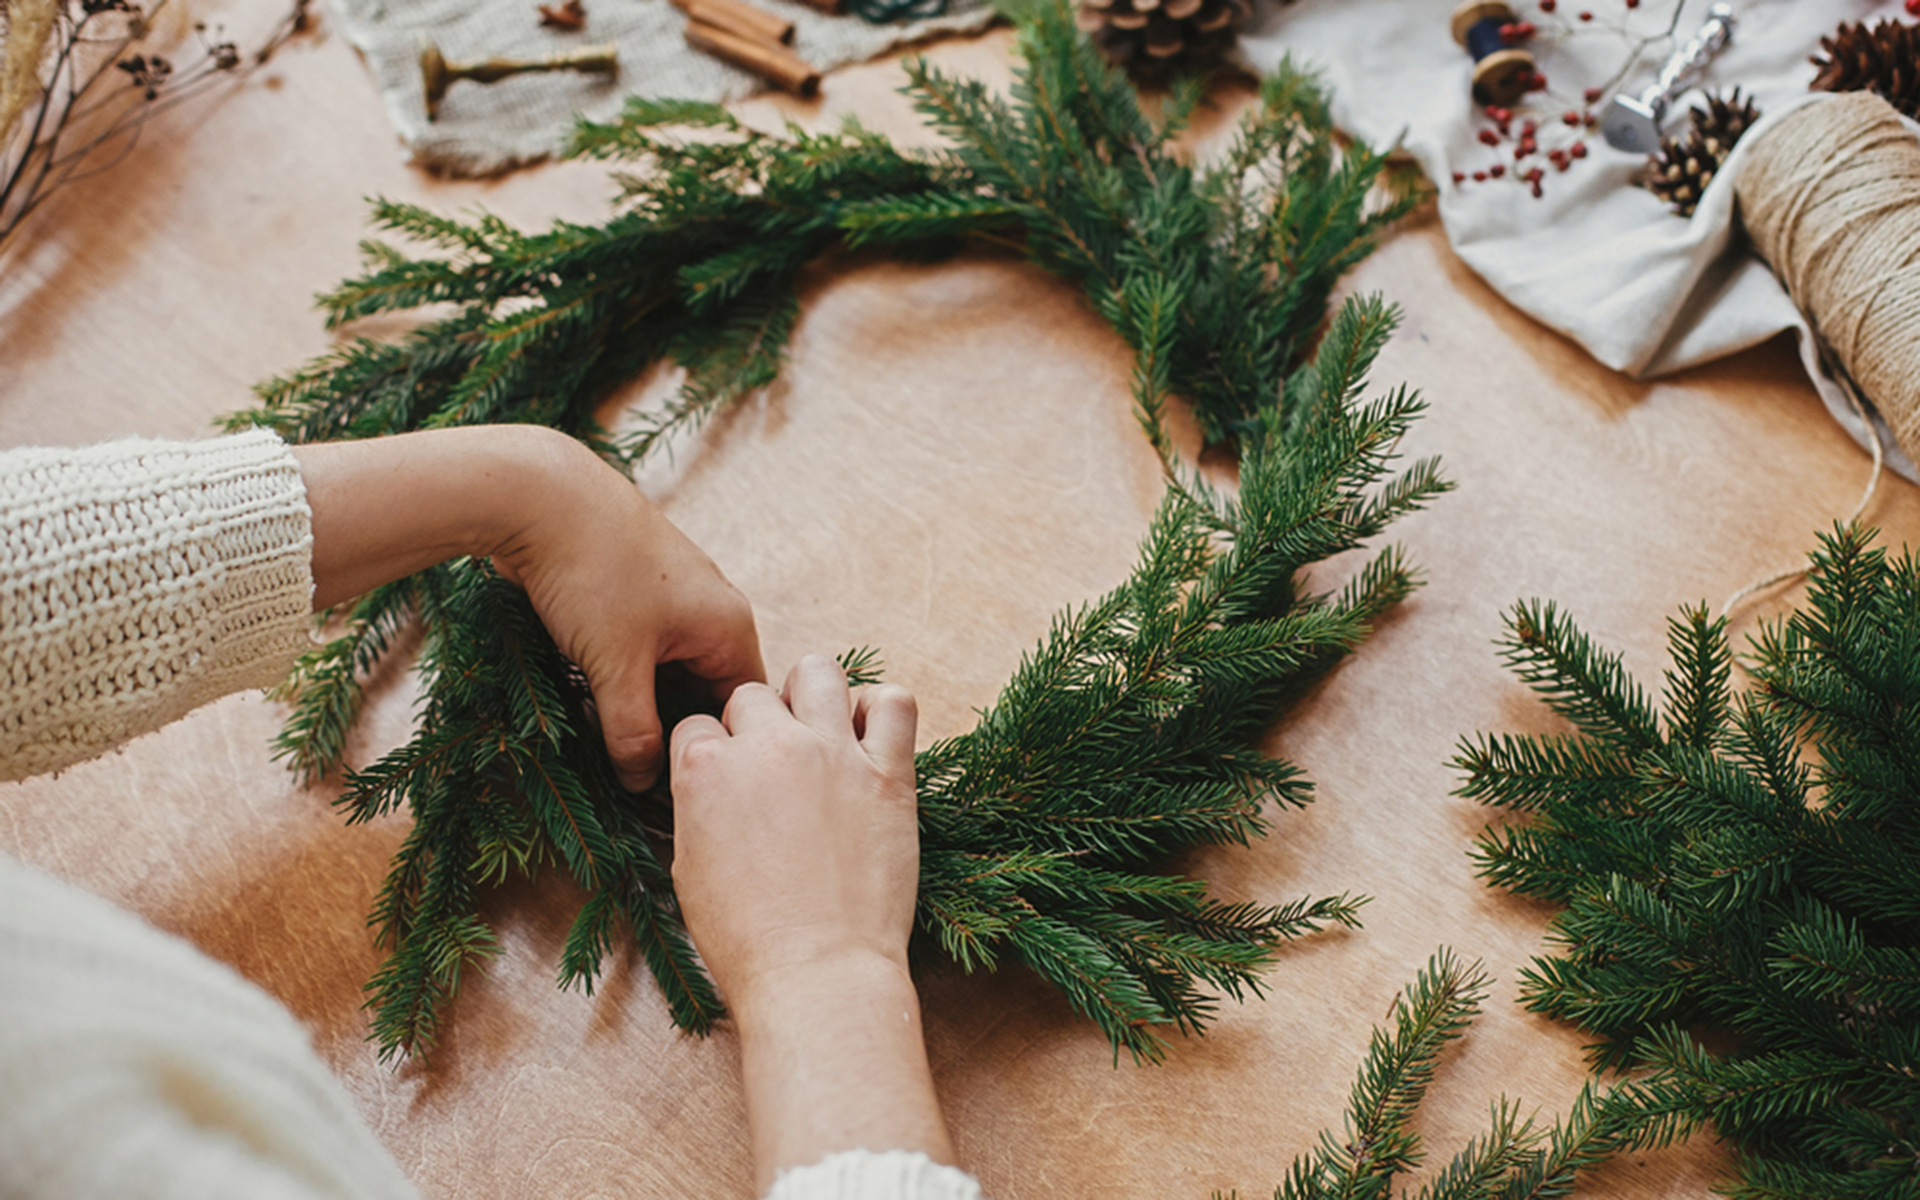 A woman creates a Christmas wreath from pine branches on a timber bench